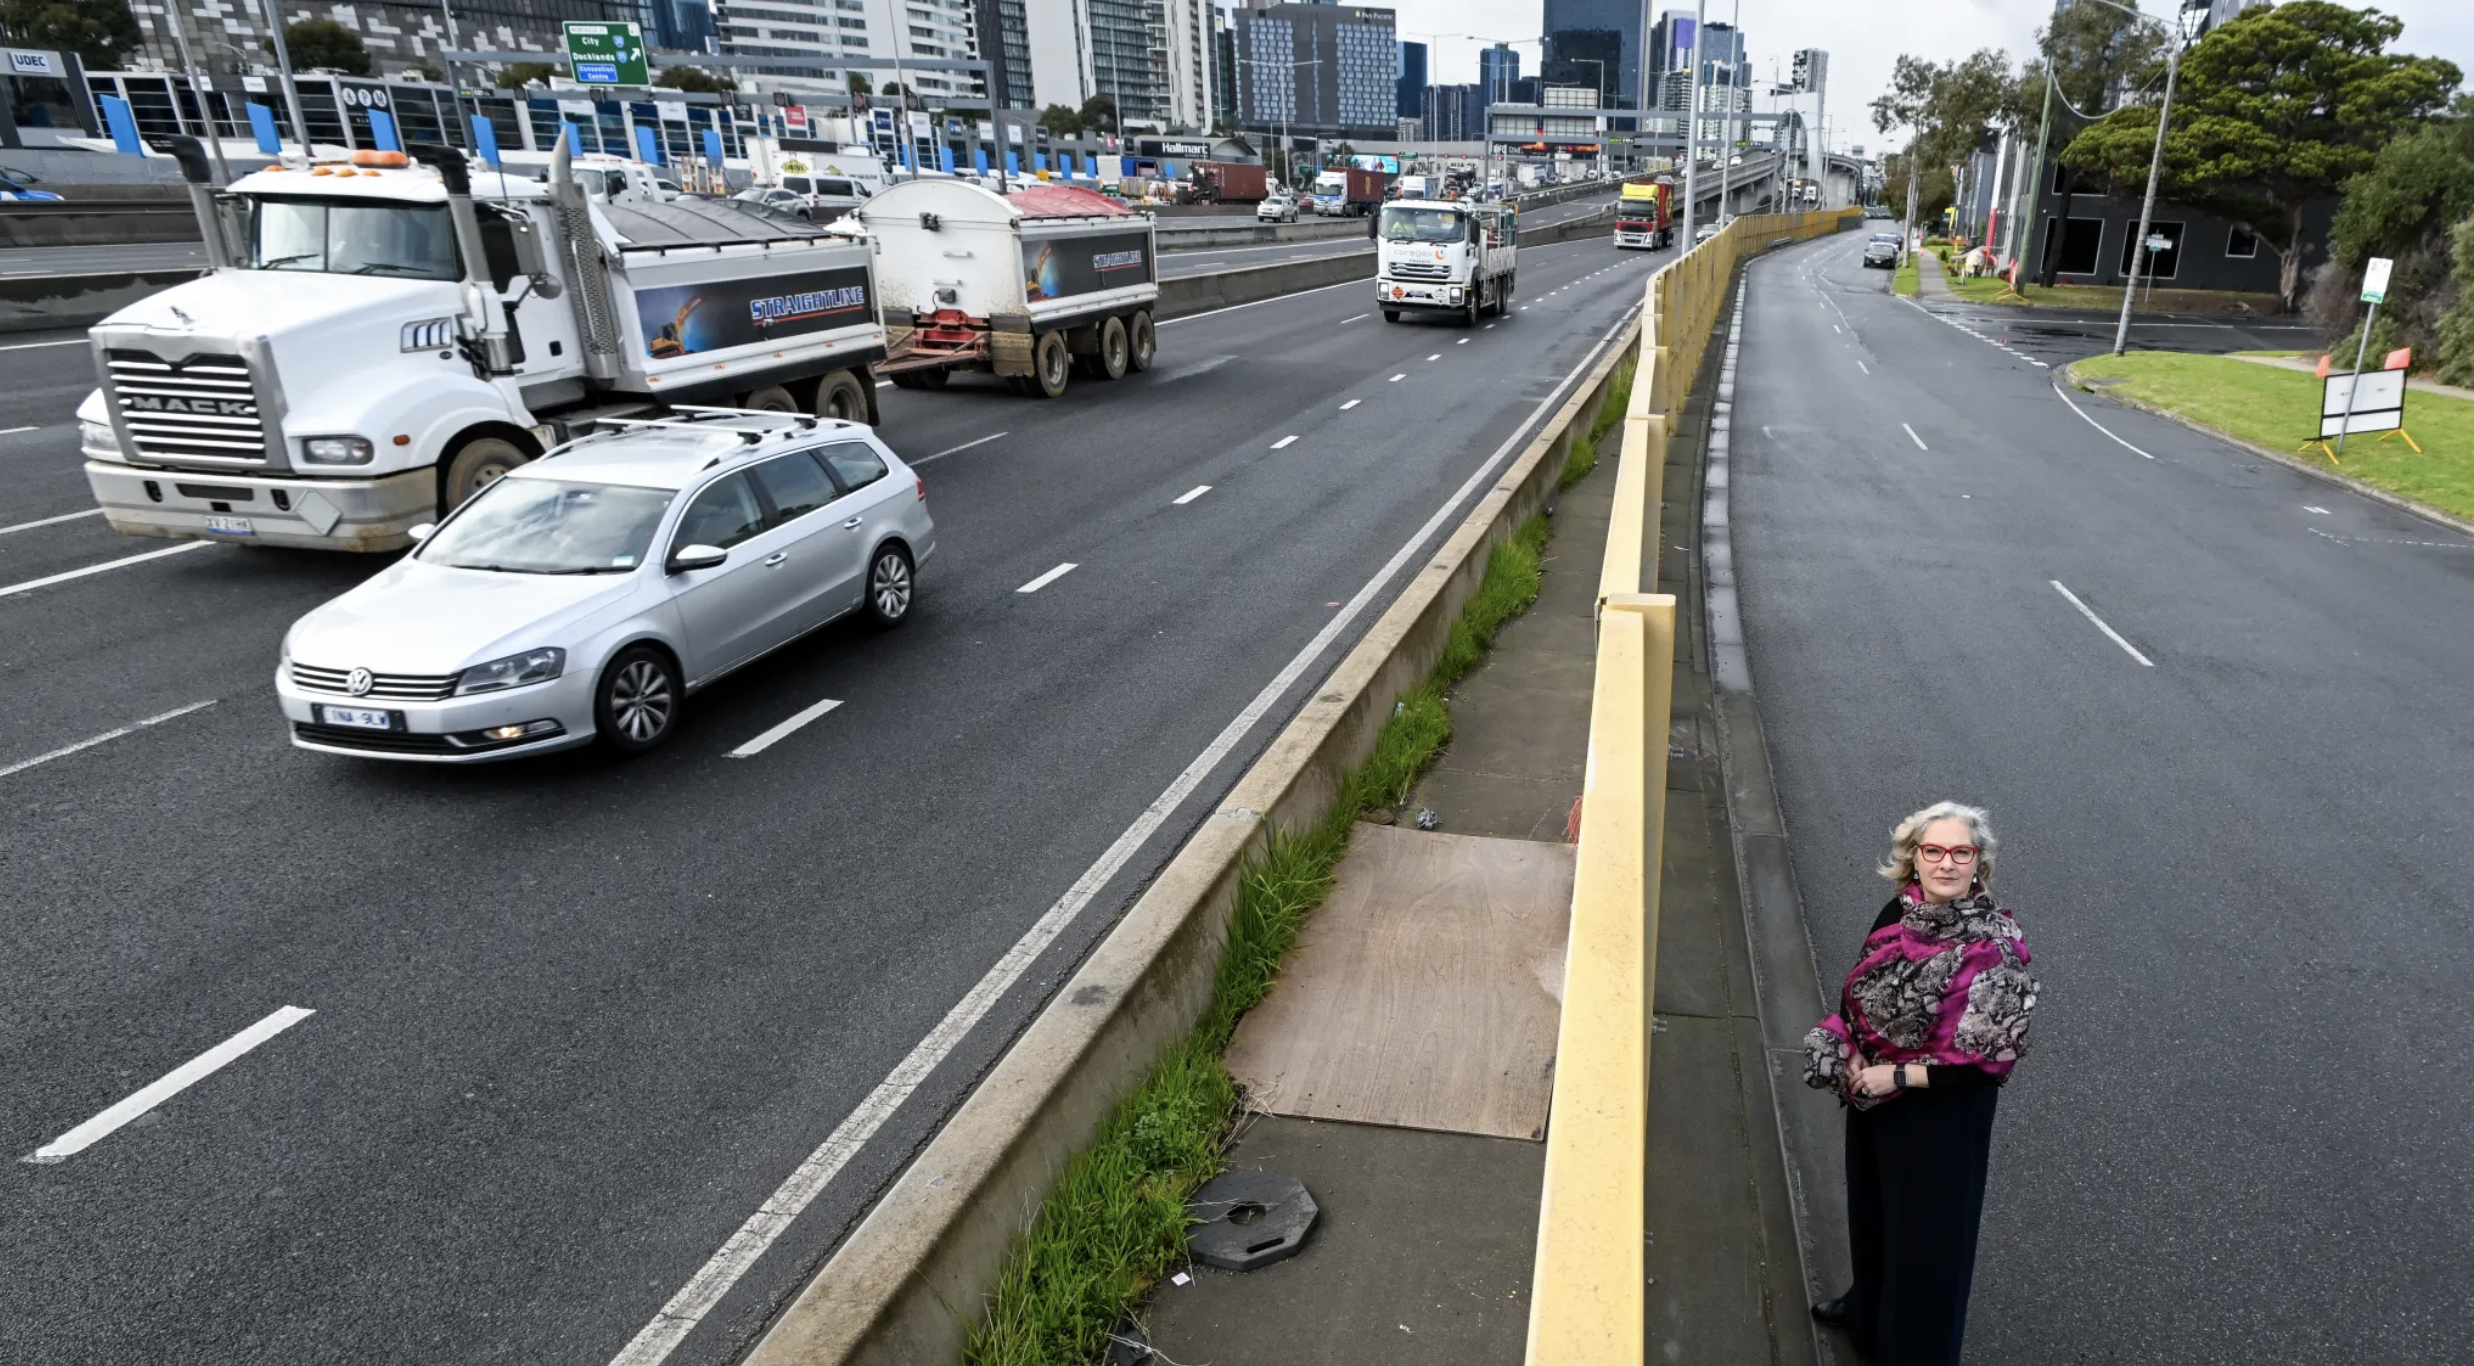 Bernadene Voss, President of the Fishermans Bend Business Forum, stands where a bridge for a tram to Fishermans Bend was proposed to be built by 2025